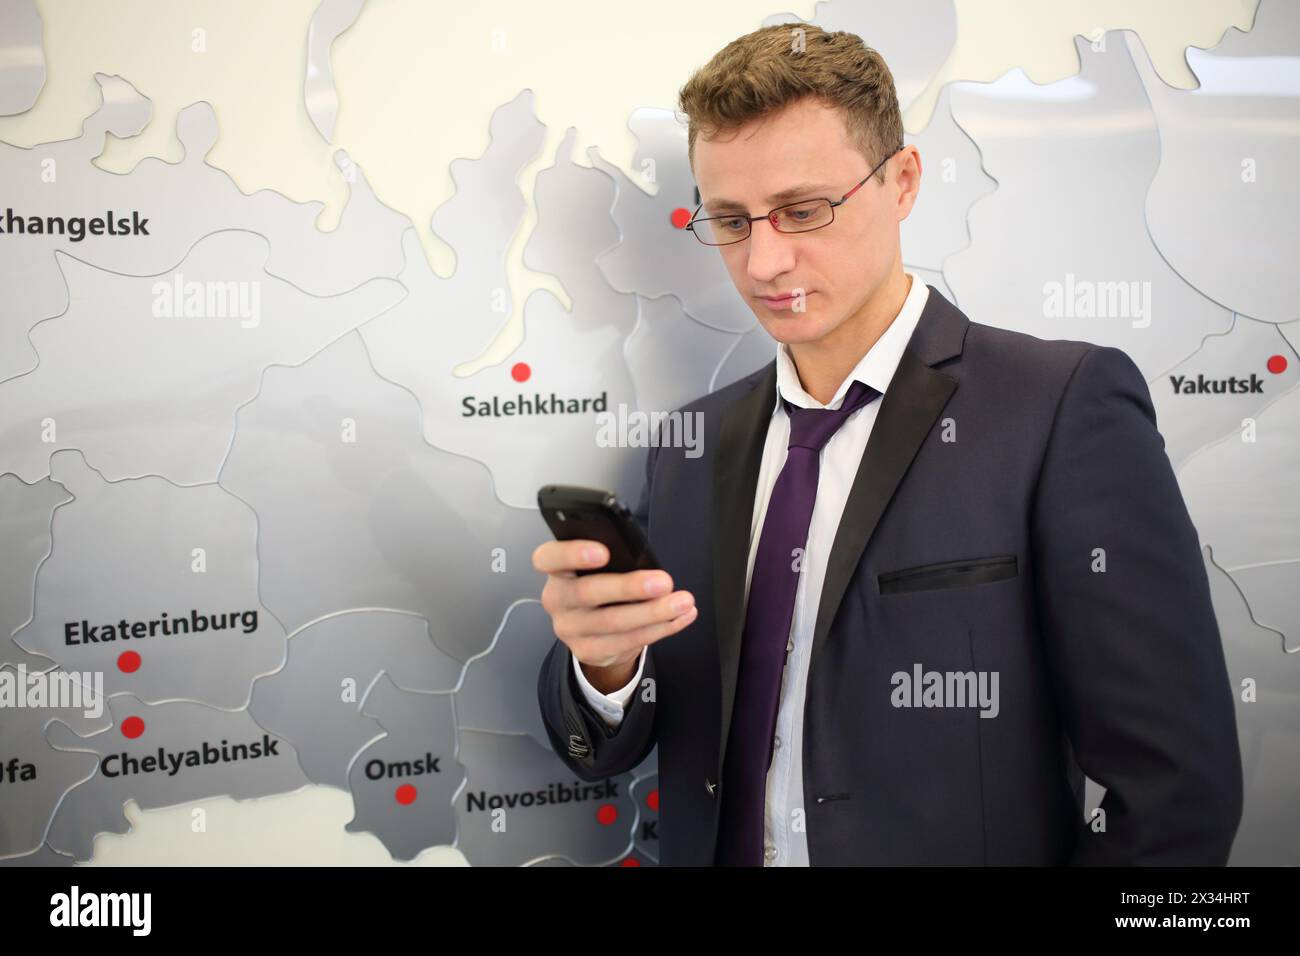 Portrait of businessman with phone leaning against wall with map Stock Photo